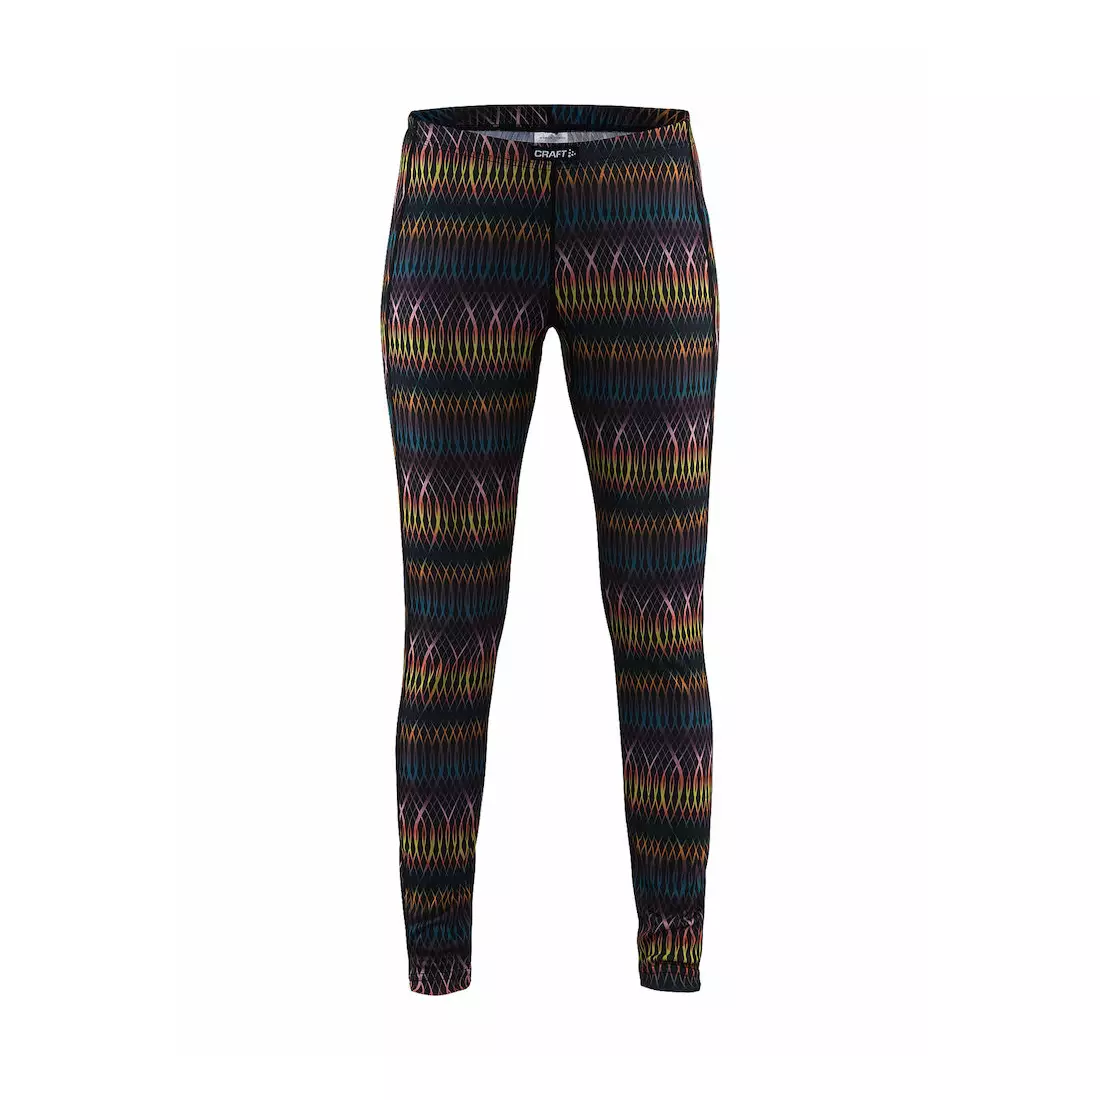 CRAFT MIX &amp; MATCH functional women's thermal pants 1904509-1117